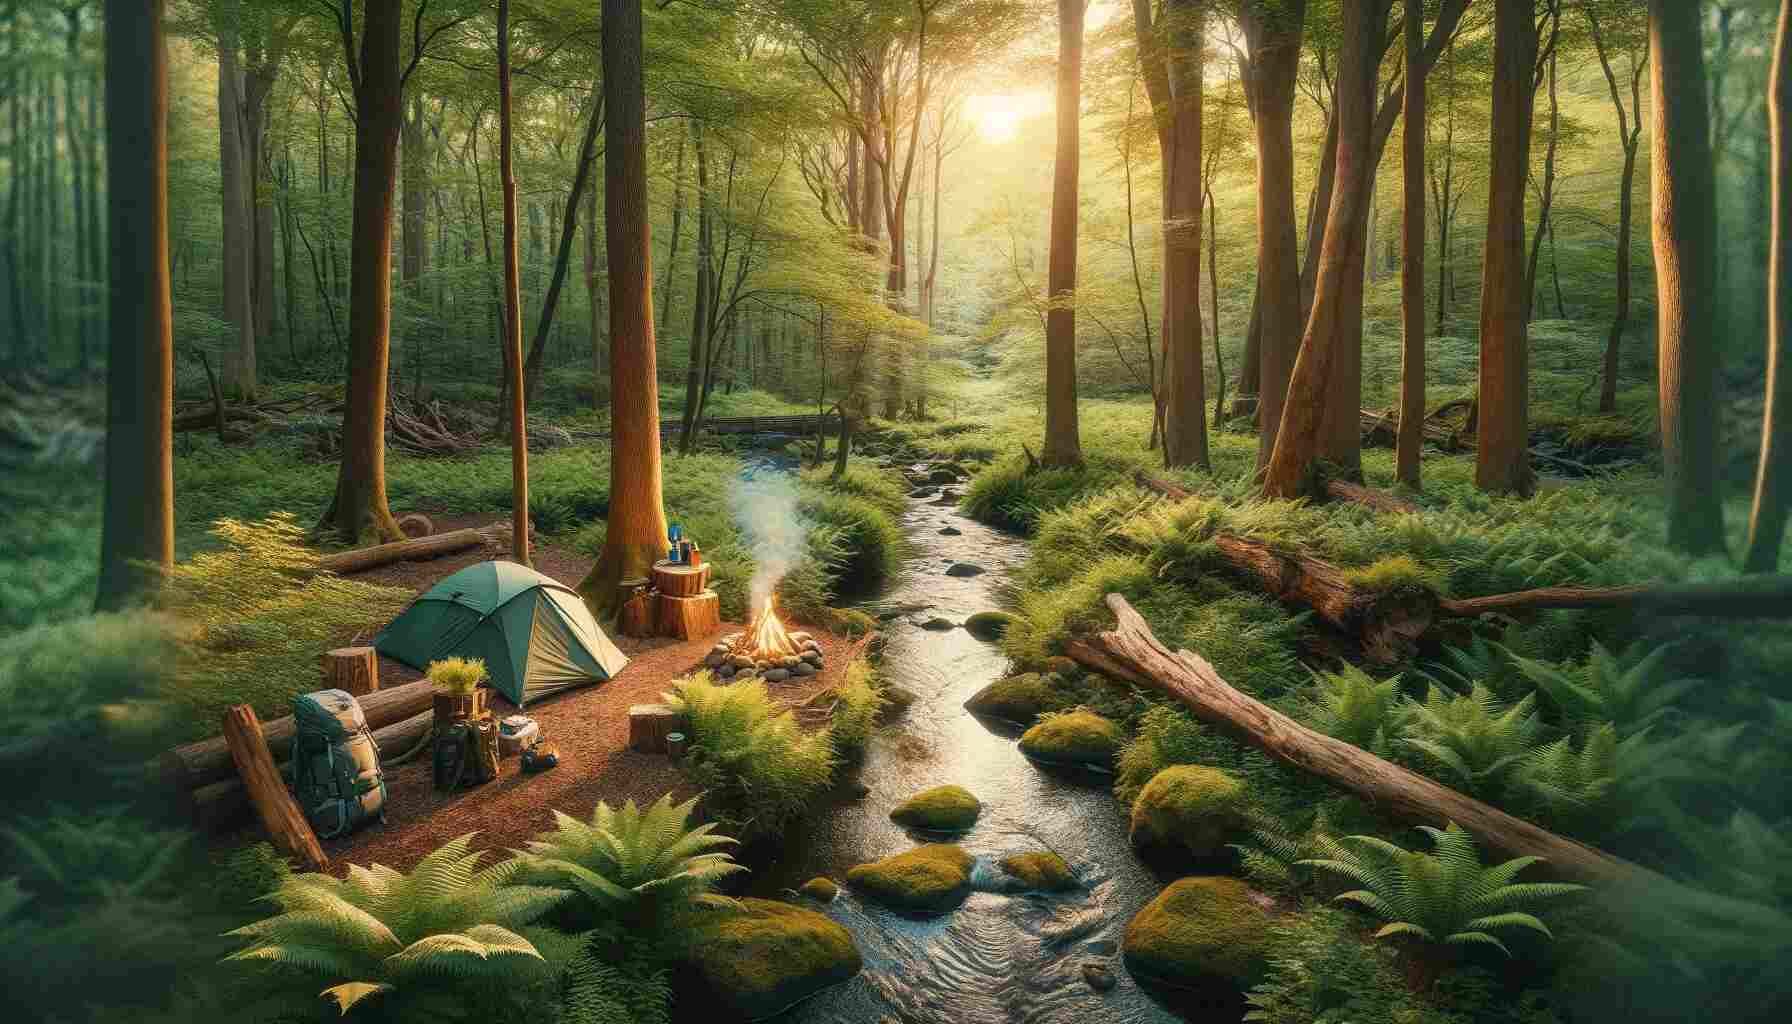 An idyllic dispersed camping scene in New Jersey, featuring a cozy campsite with a tent and campfire by a serene stream, surrounded by lush greenery, native trees, and ferns, illuminated by the warm, golden light of a setting sun.